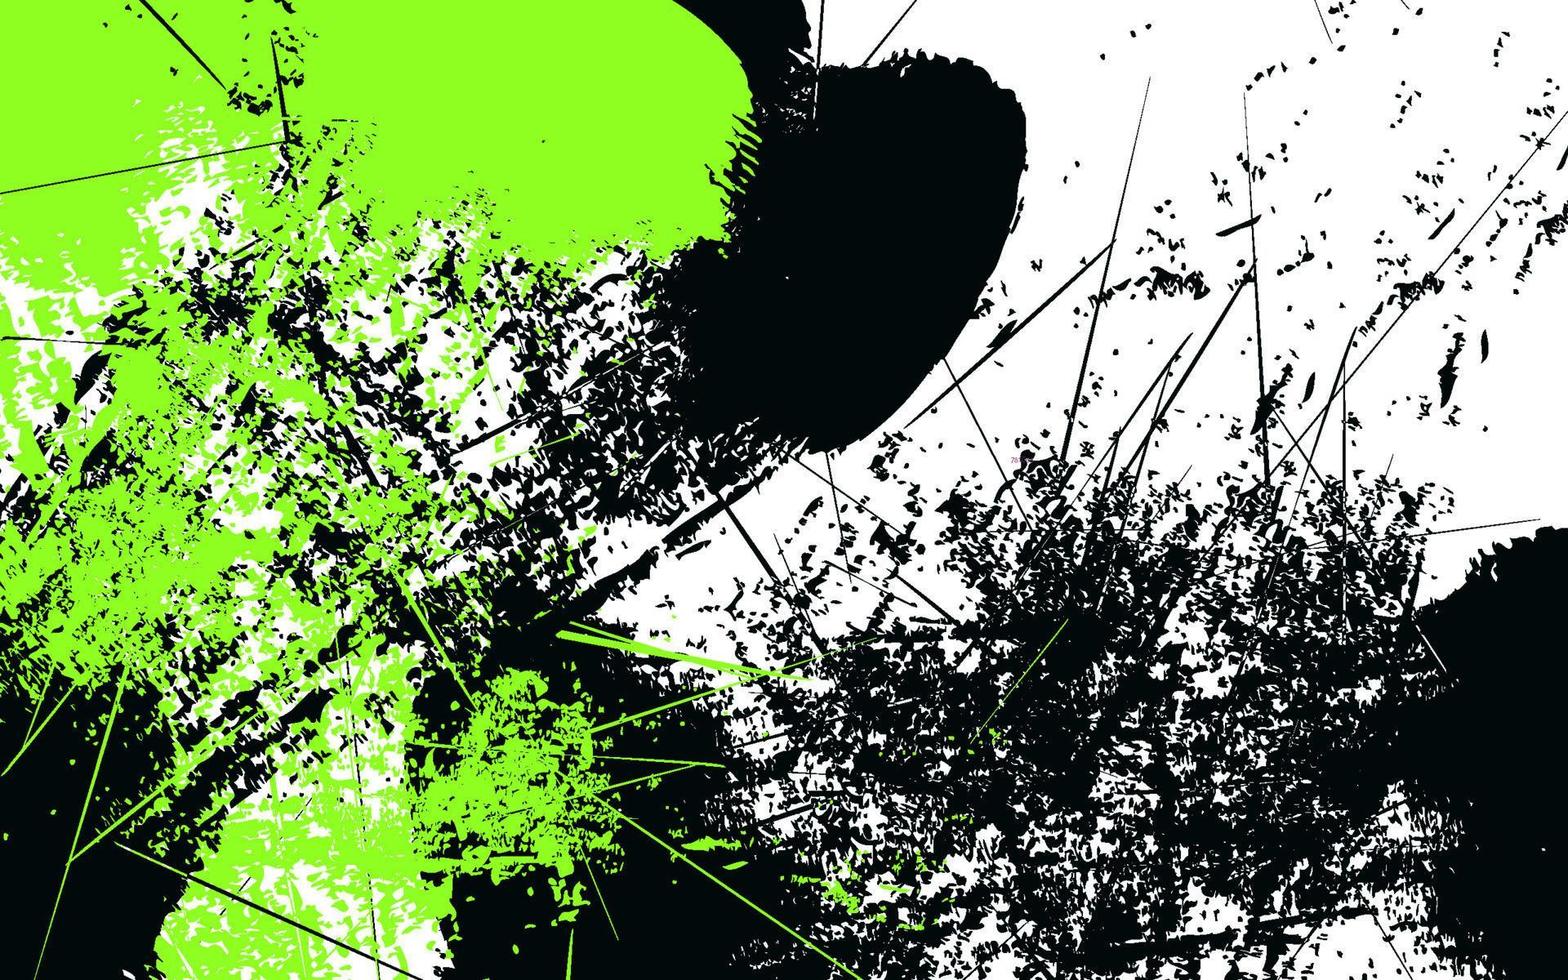 Abstract green black and white wall paint background vector